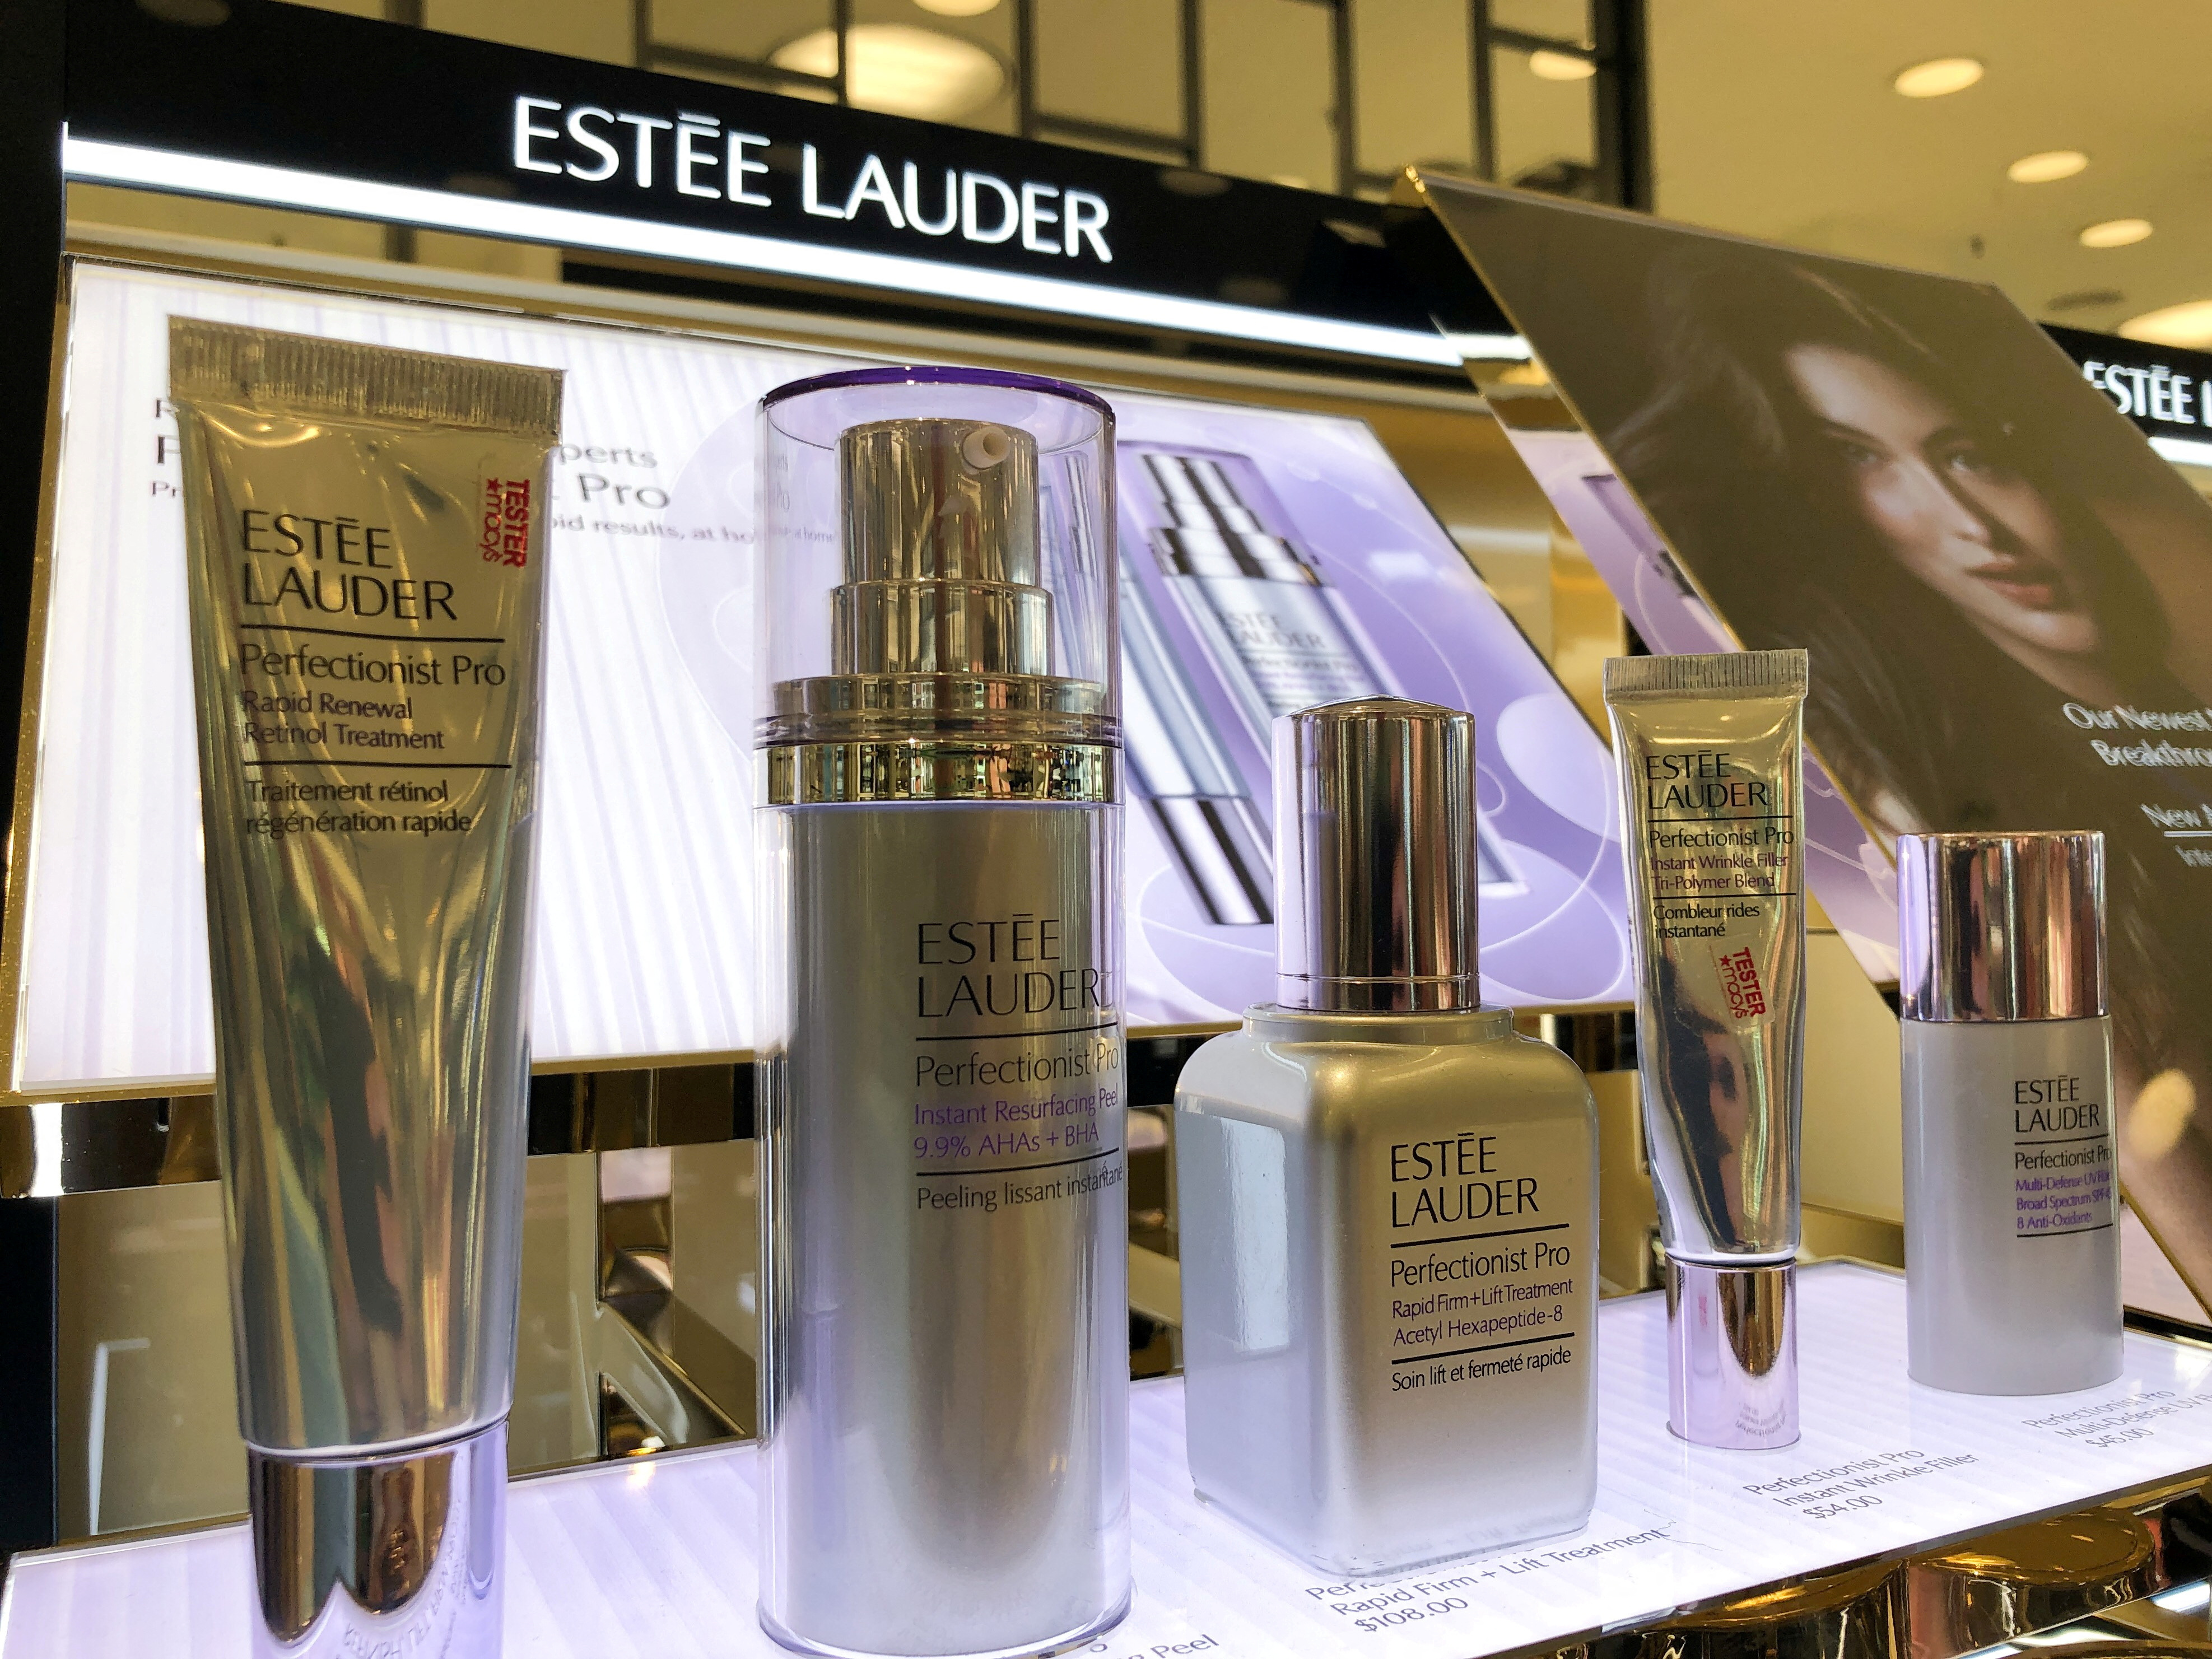 Estee Lauder Slashes 2,000 Jobs and Closes 15% of Stores Amid Pandemic